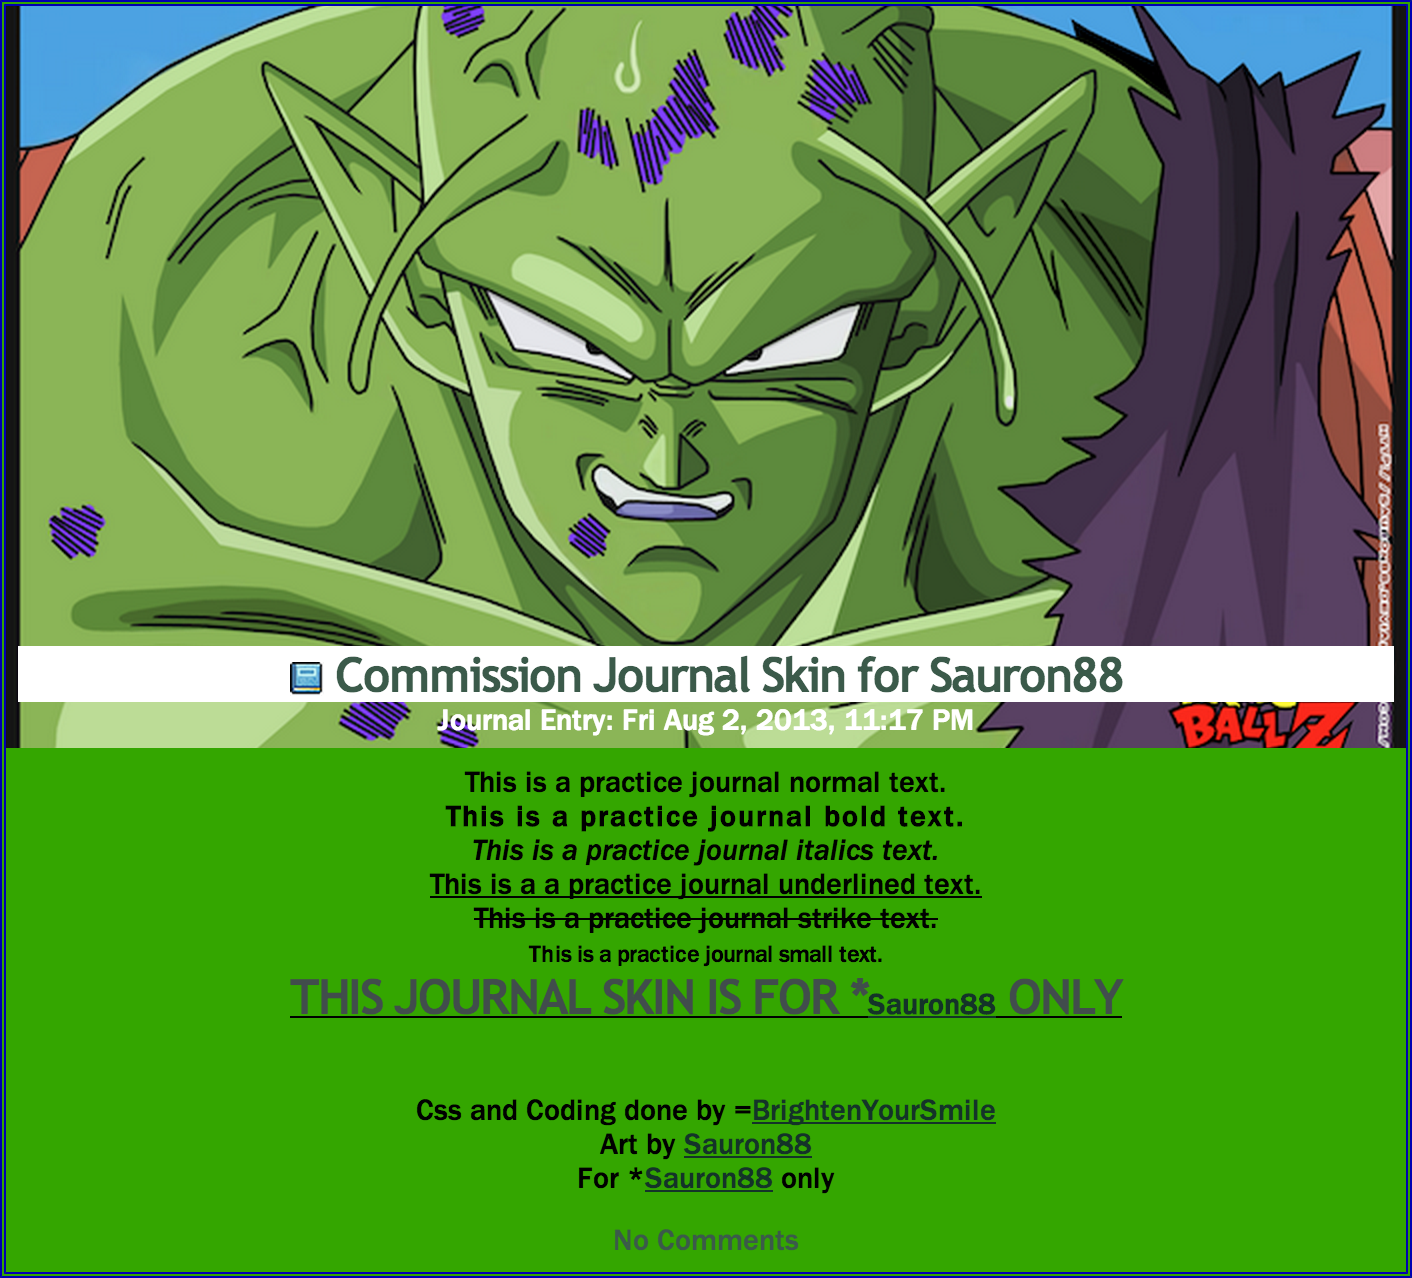 Commission Journal Skin for Sauron88